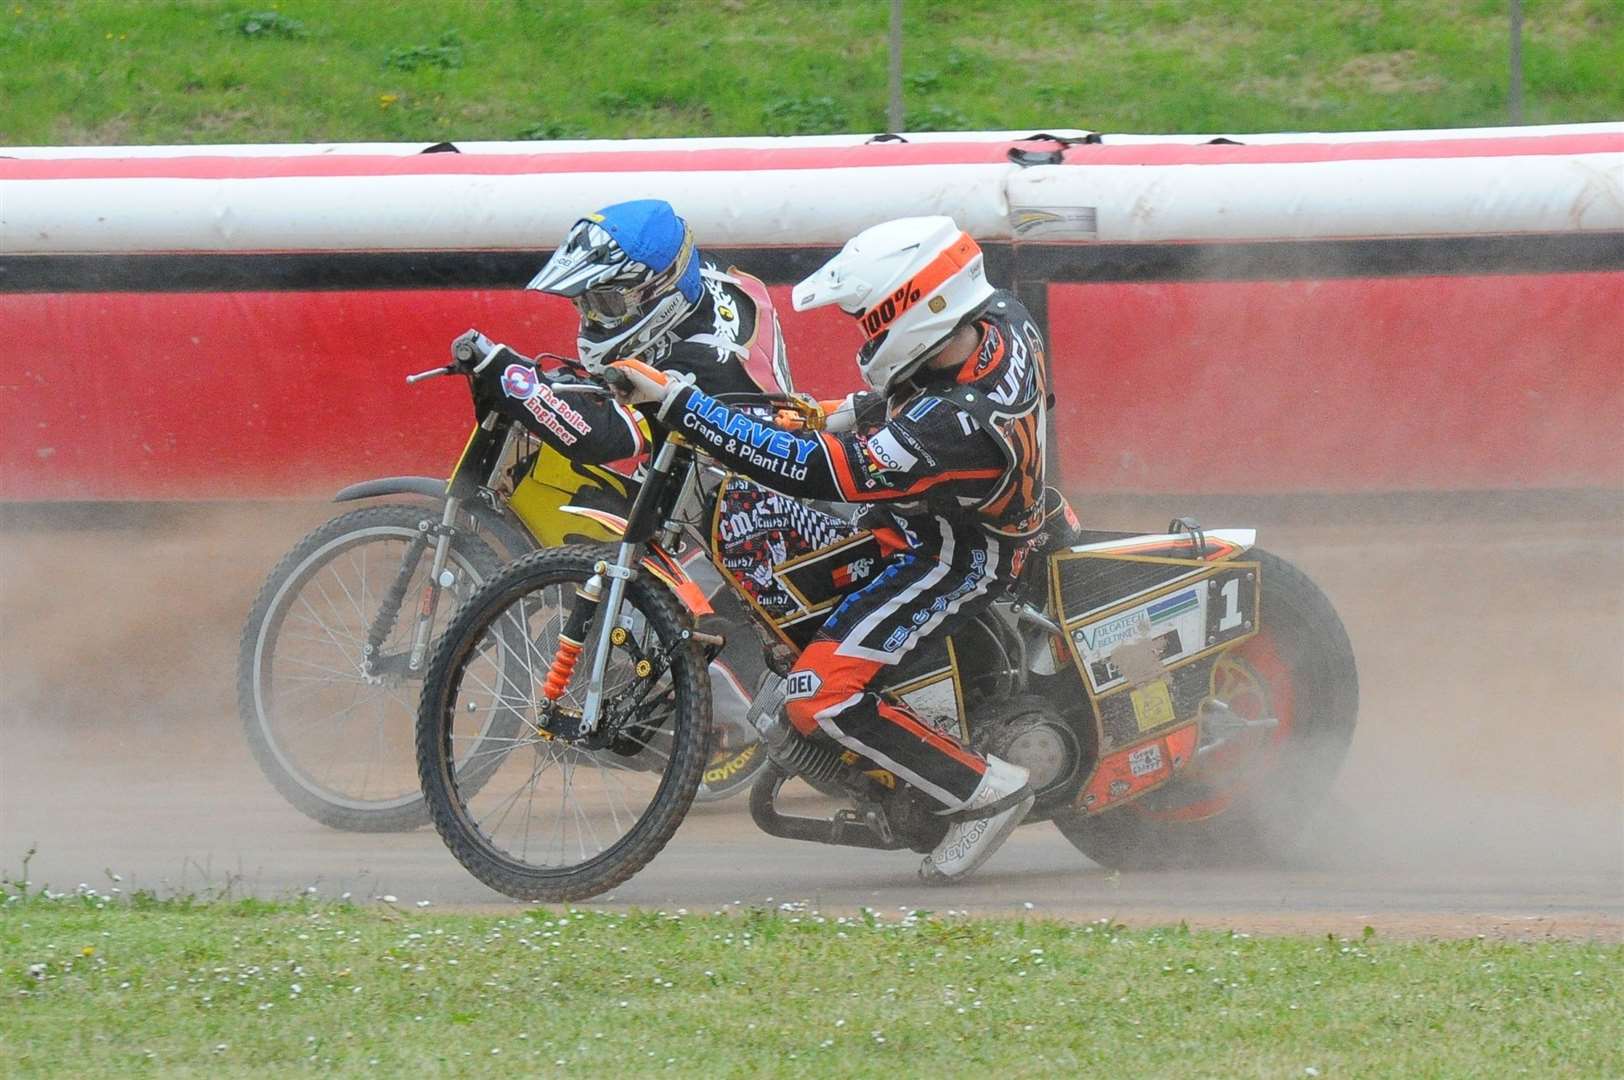 Kings Rewind is showing a dramatic climax and greatest ever last bend of heat 15 ever seen at Central Park Picture: Elizabeth Leslie